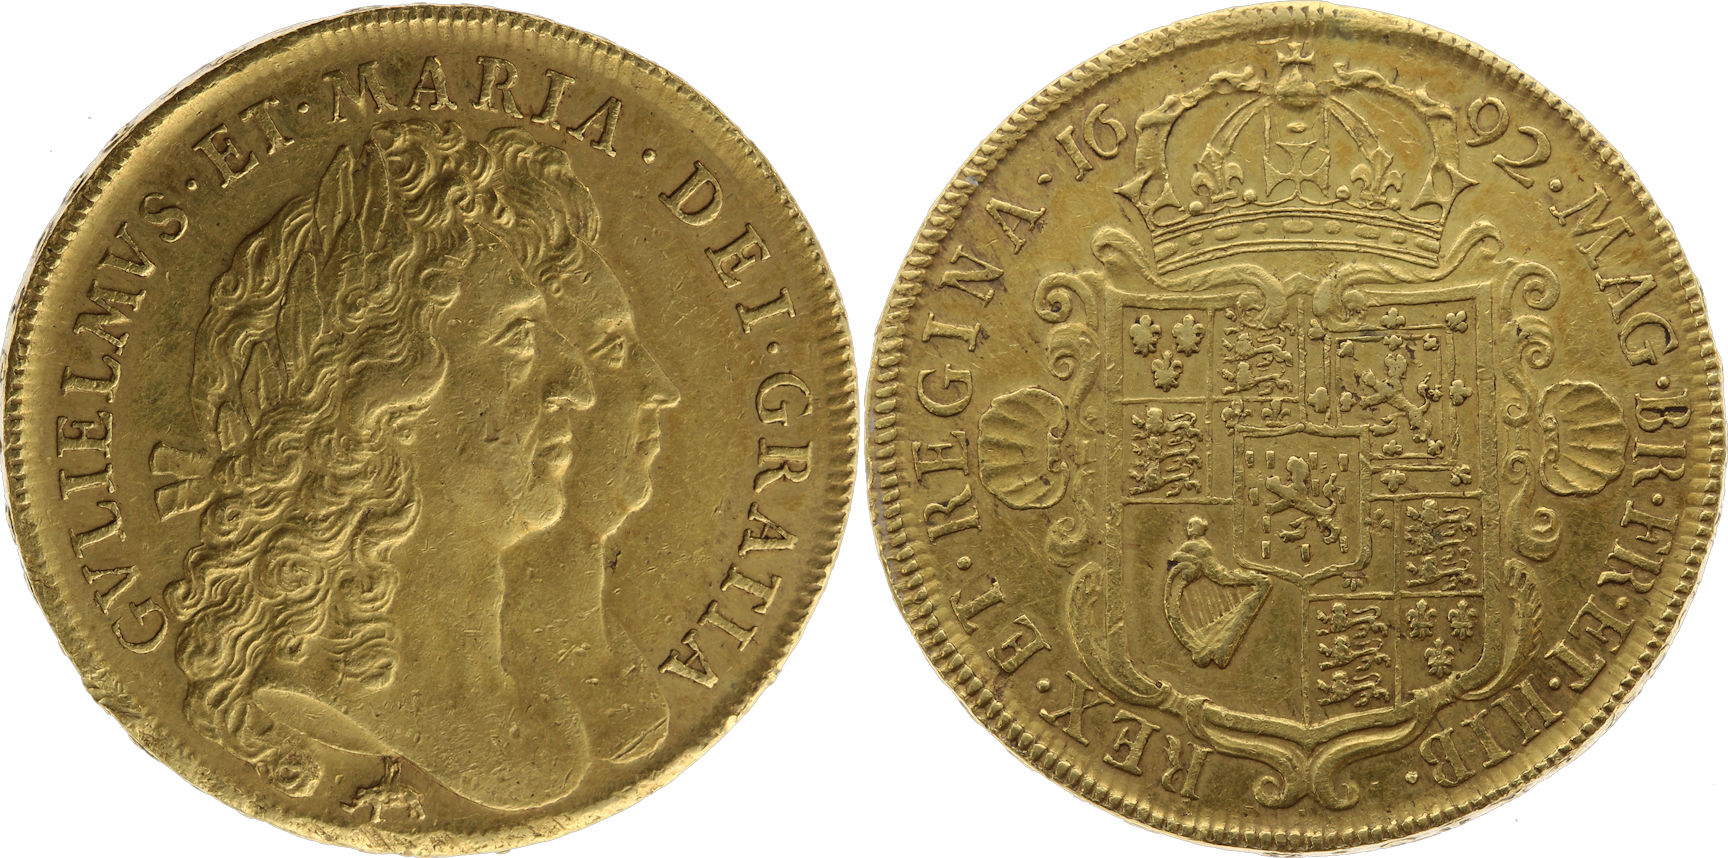 Mary and William 5 guineas ©Bundesbank